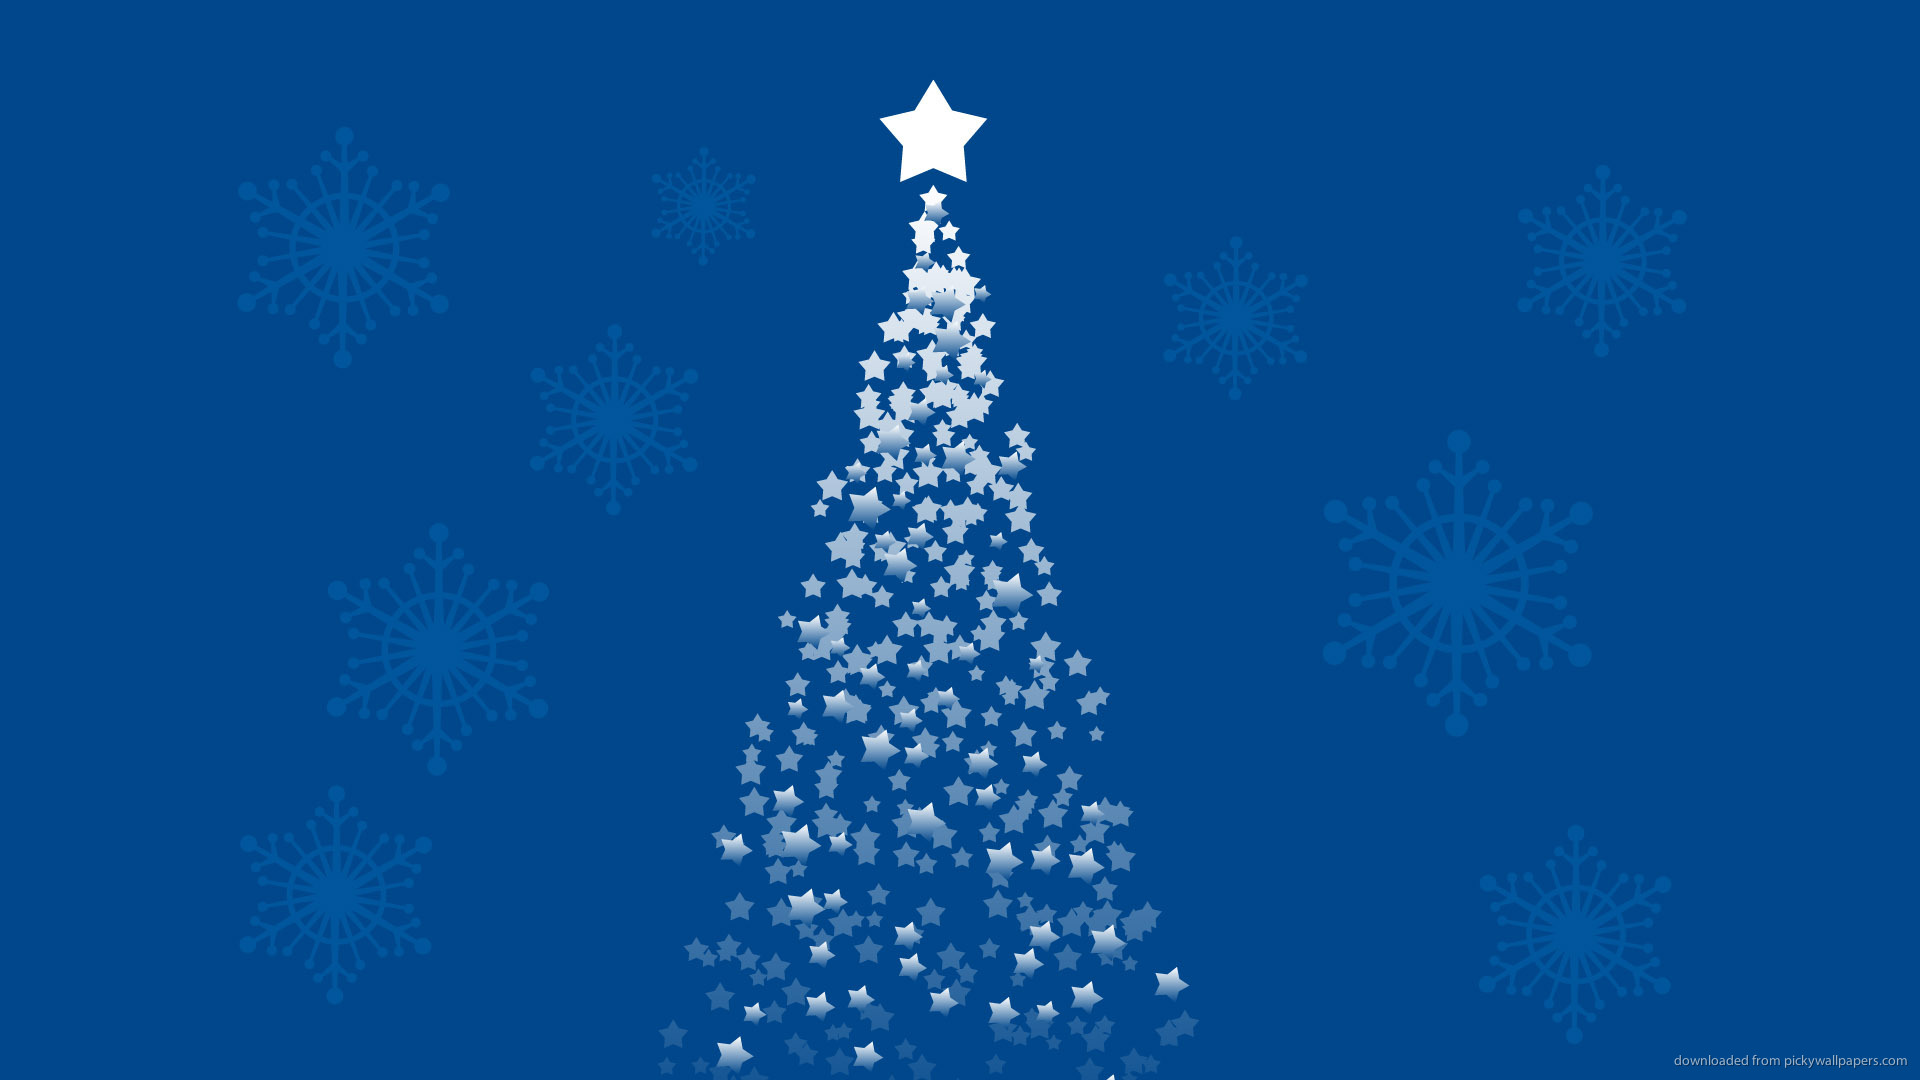 Ascending Star Forming A Christmas Tree On Blue Background Picture